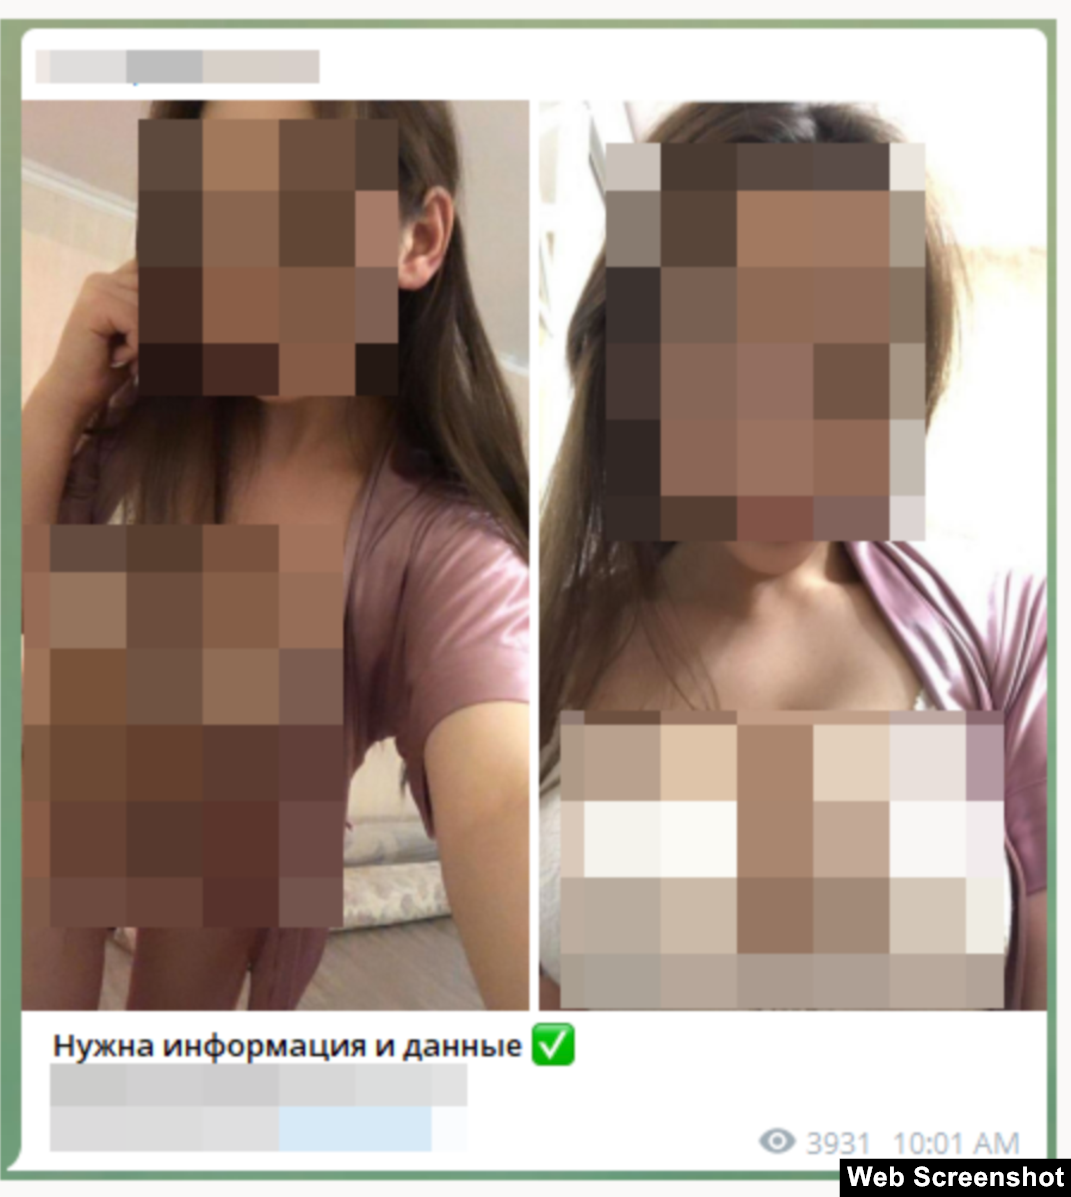 The Sinister Side Of Kyrgyzstan's Online Sex Industry